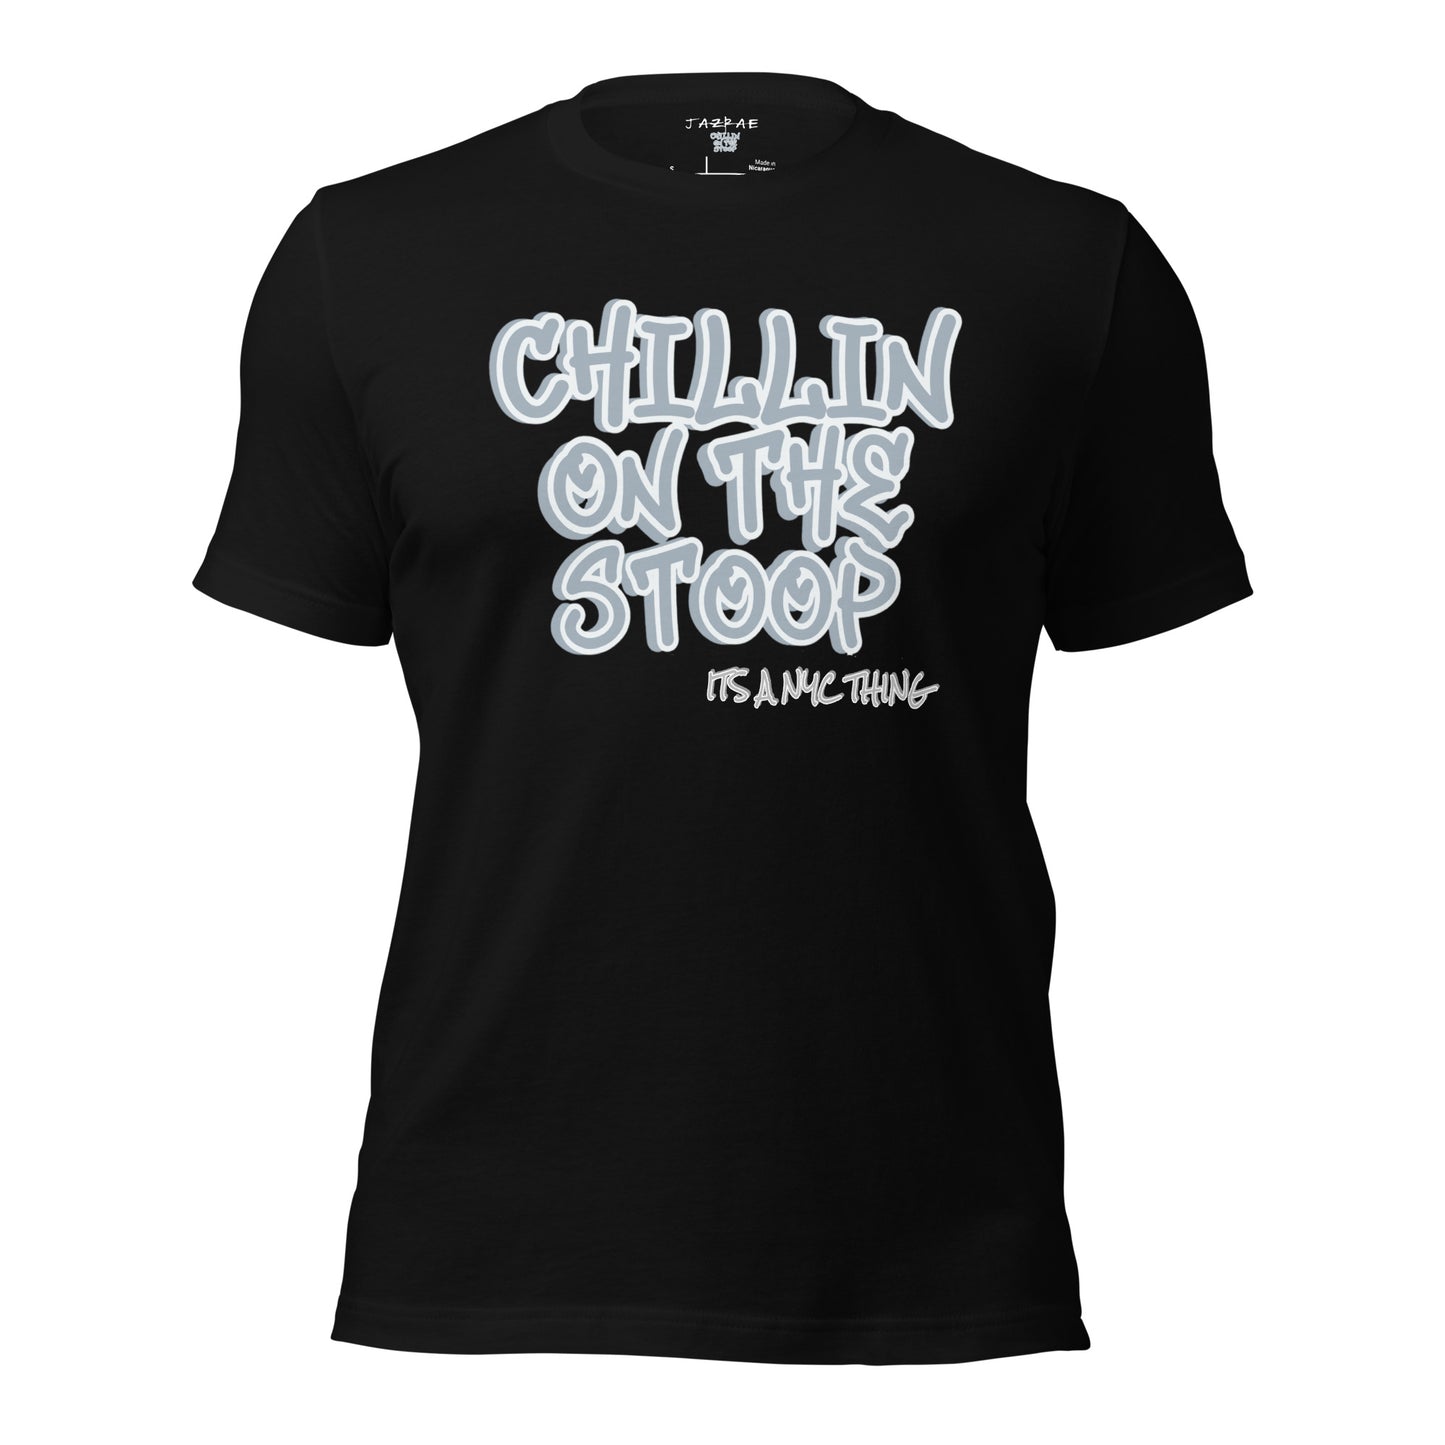 CHILLIN ON THE STOOP NYC Unisex t-shirt